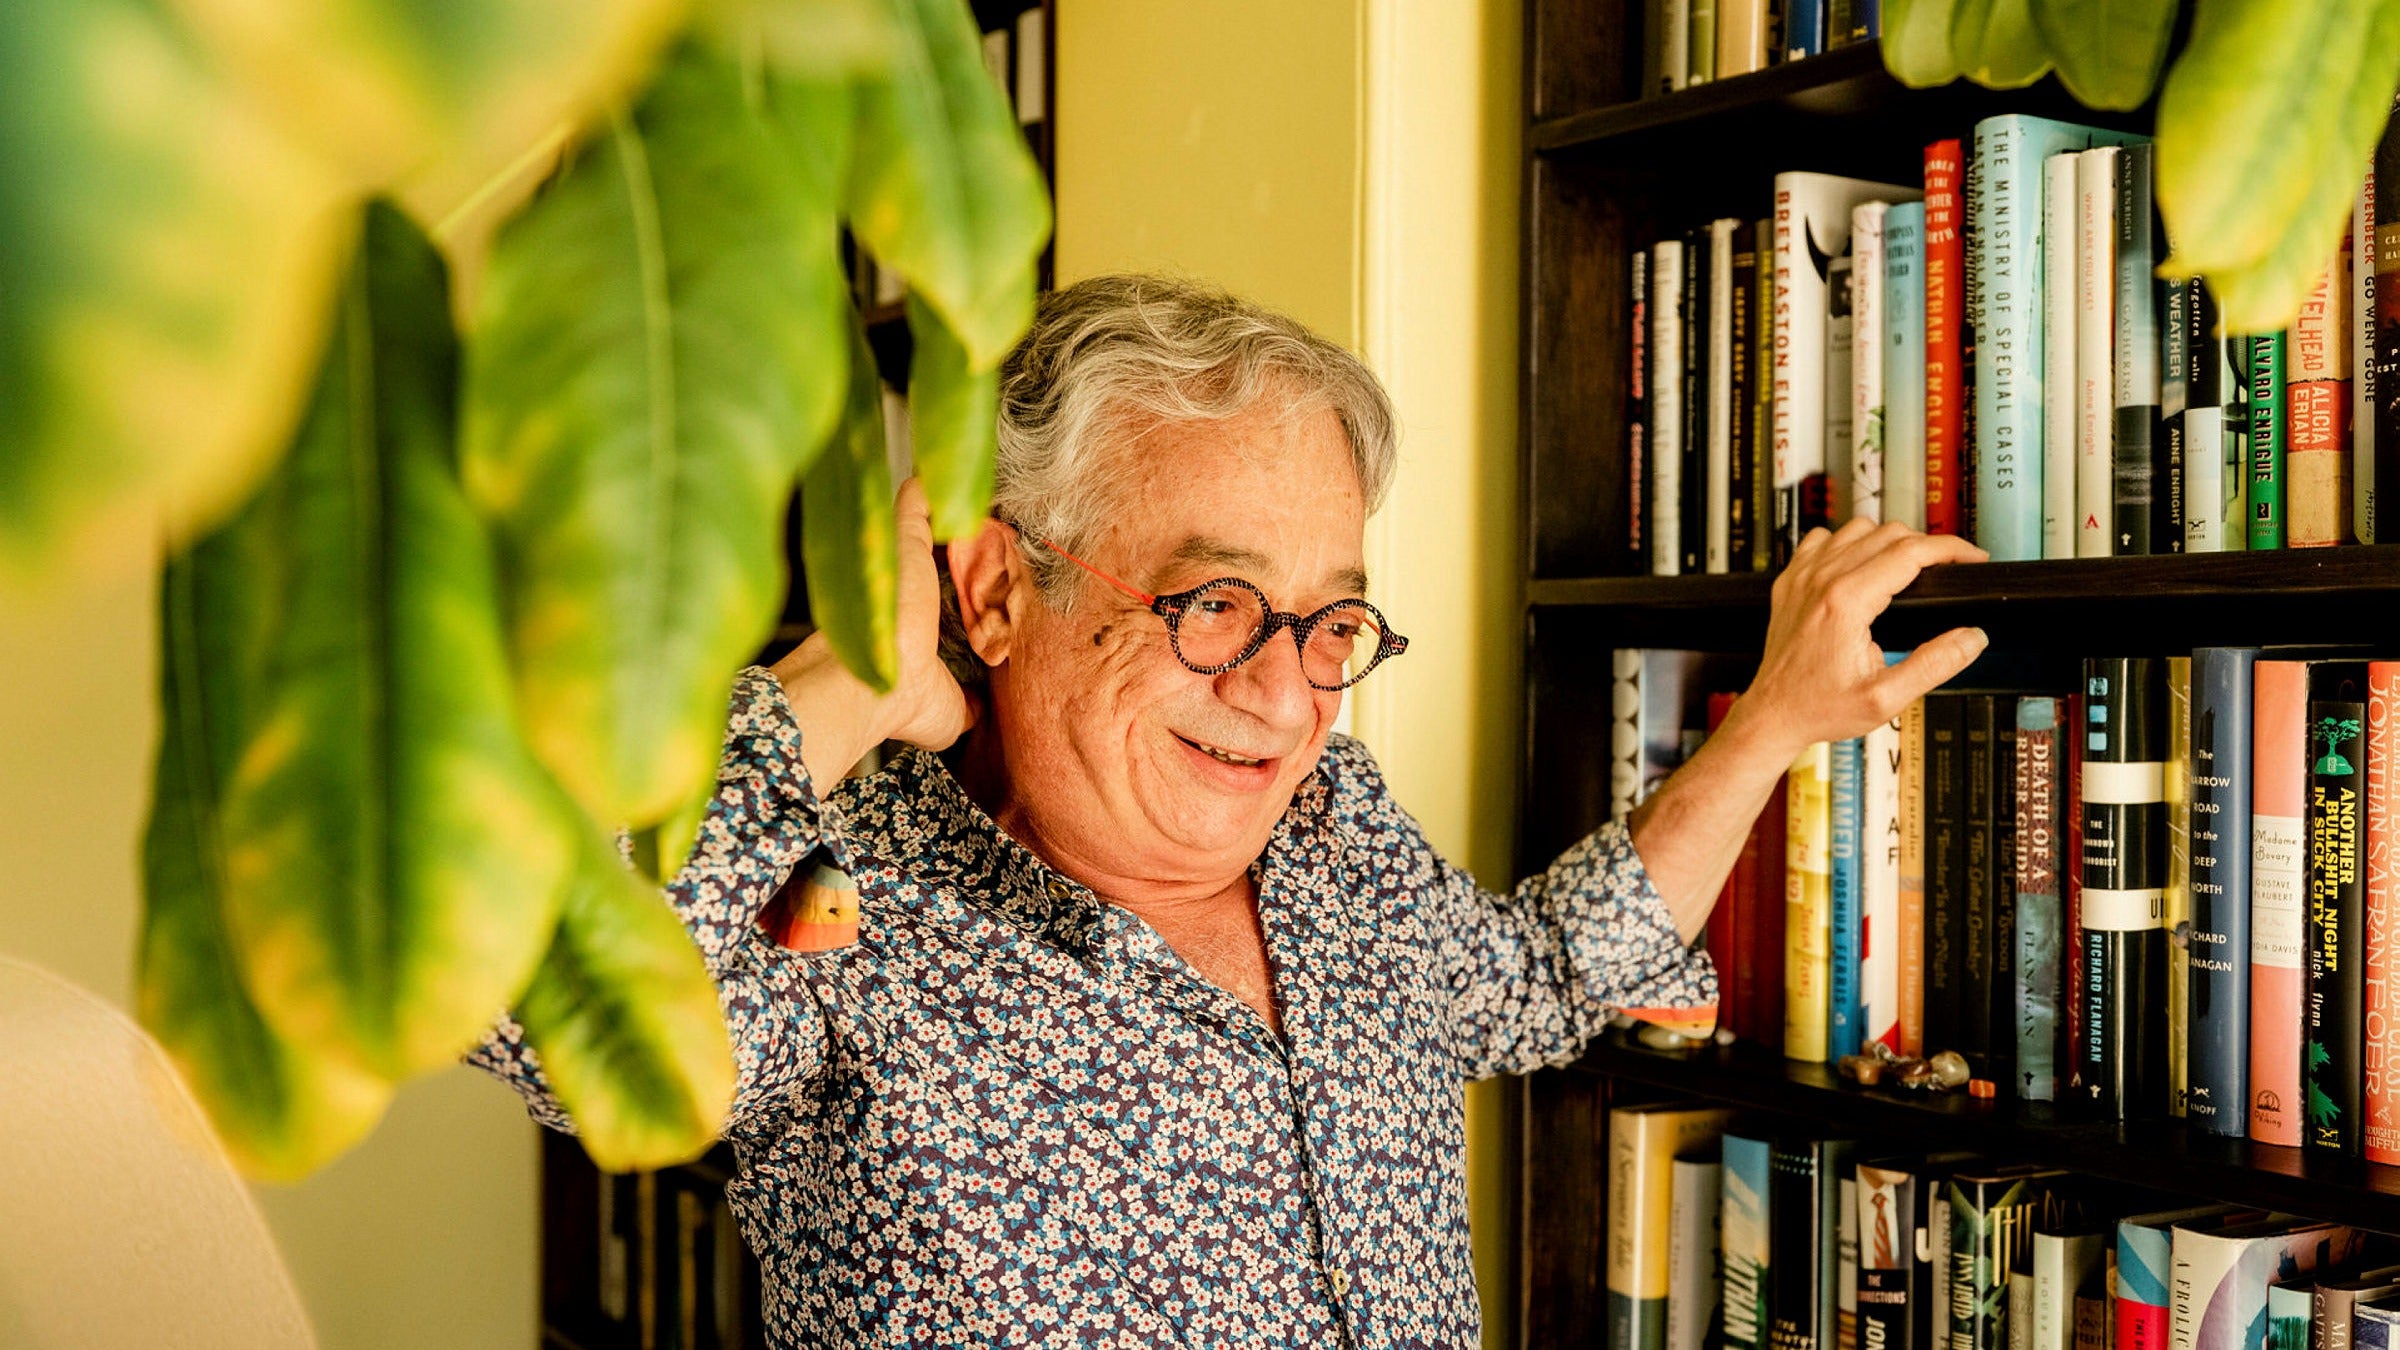 Rabih Alameddine stands between a bookshelf and a plant. He wears a bright floral patterned shirt and round black and red speckled glasses.